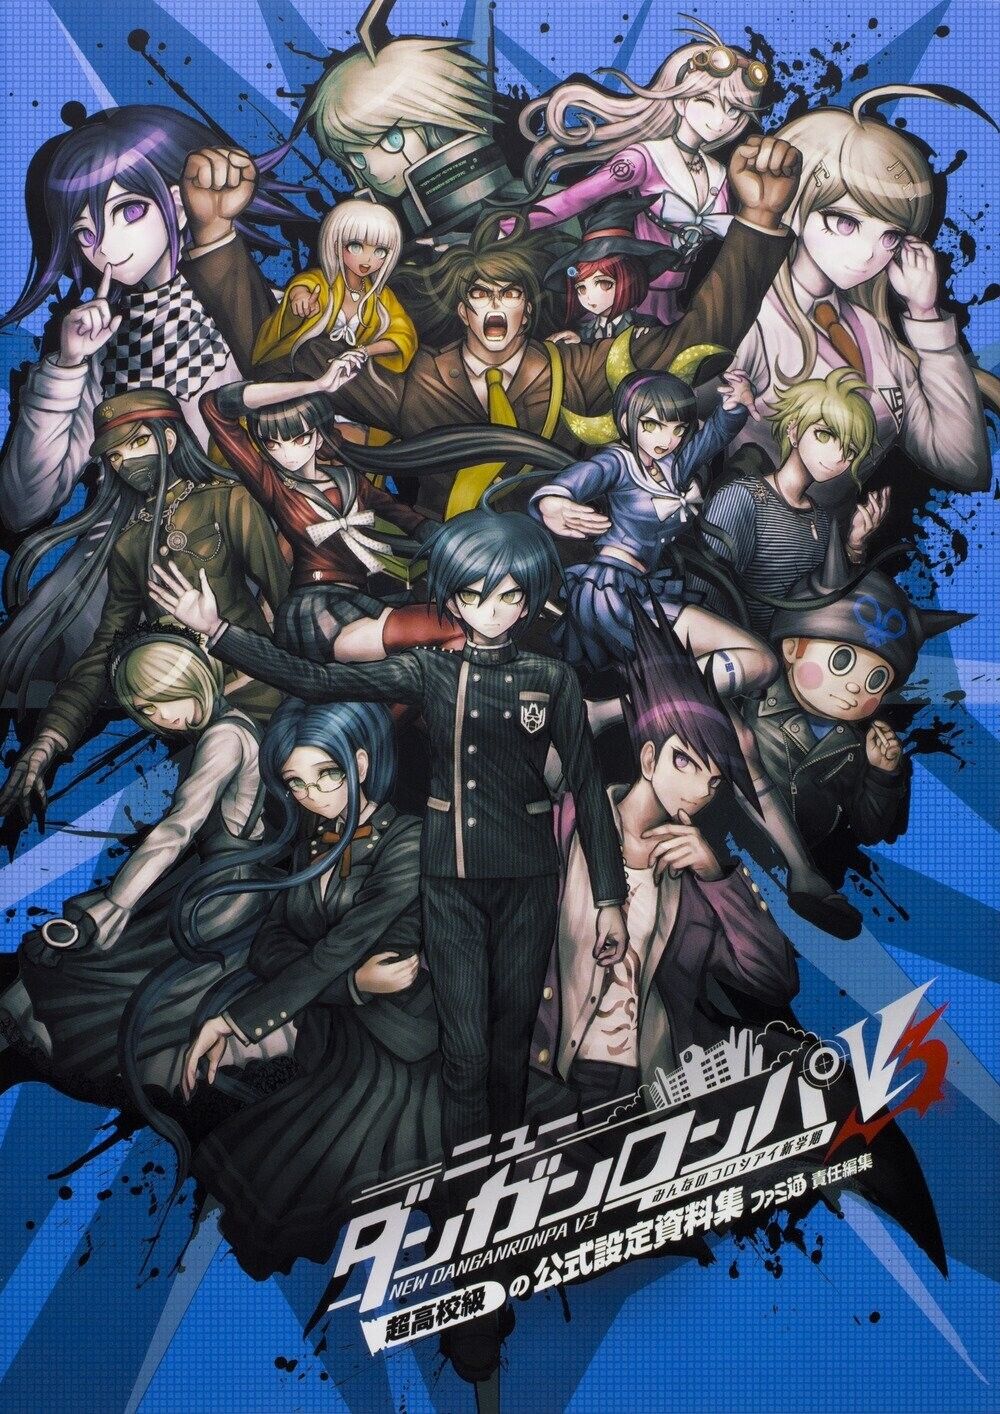 Danganronpa V3 Killing Harmony Official Art Works Book - 352 Color Pages Anime